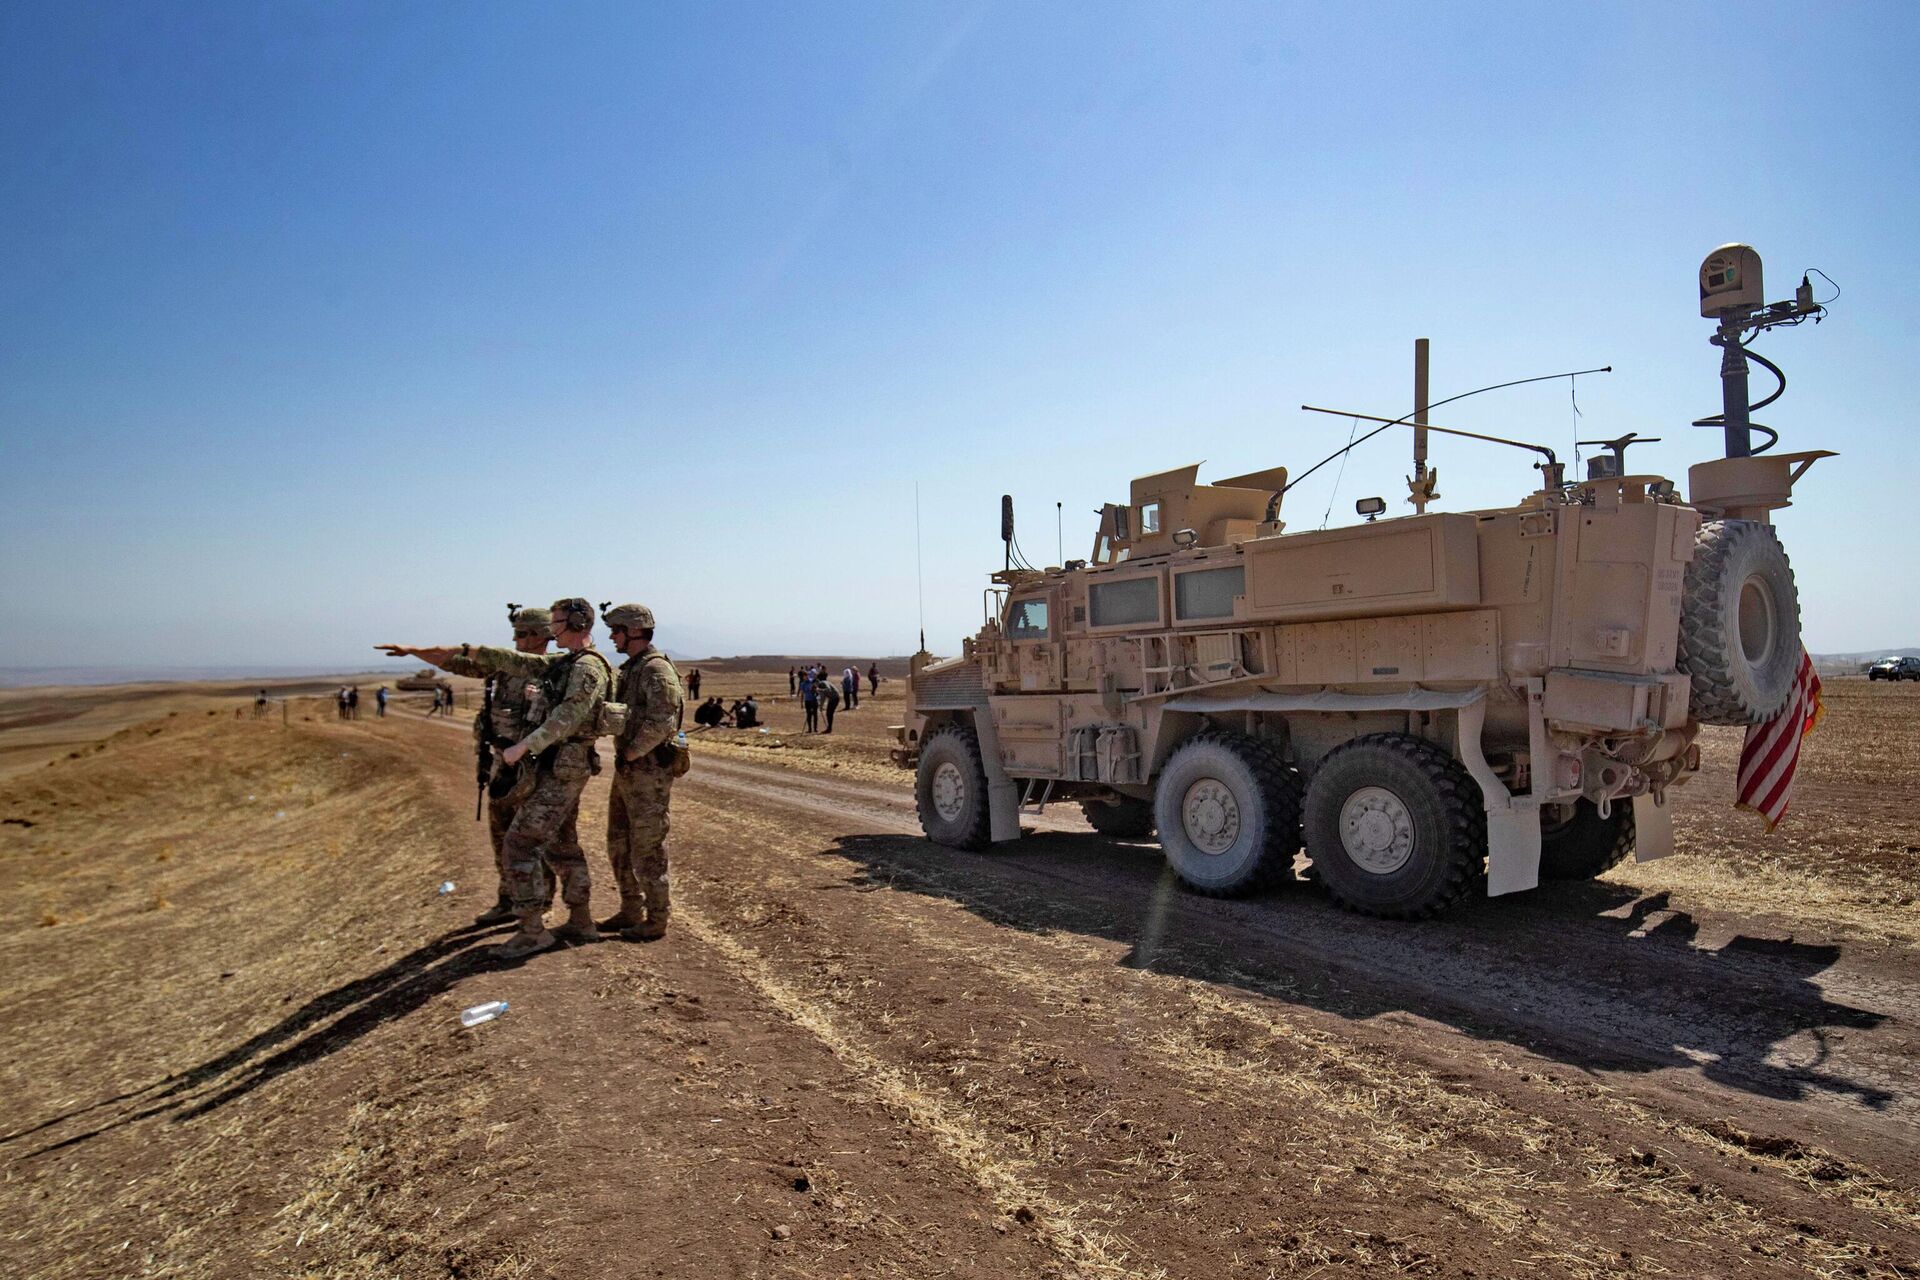 US soldiers stand near a Mine Resistant Ambush Protected (MRAP) military vehicle as they attend a joint military exercise between forces of the US-led Combined Joint Task Force-Operation Inherent Resolve coalition against the Islamic State (IS) group and members of the Syrian Democratic Forces (SDF) in the countryside of the town of al-Malikiya (Derik in Kurdish) in Syria's northeastern Hasakah province on September 7, 2022 - Sputnik International, 1920, 09.09.2022